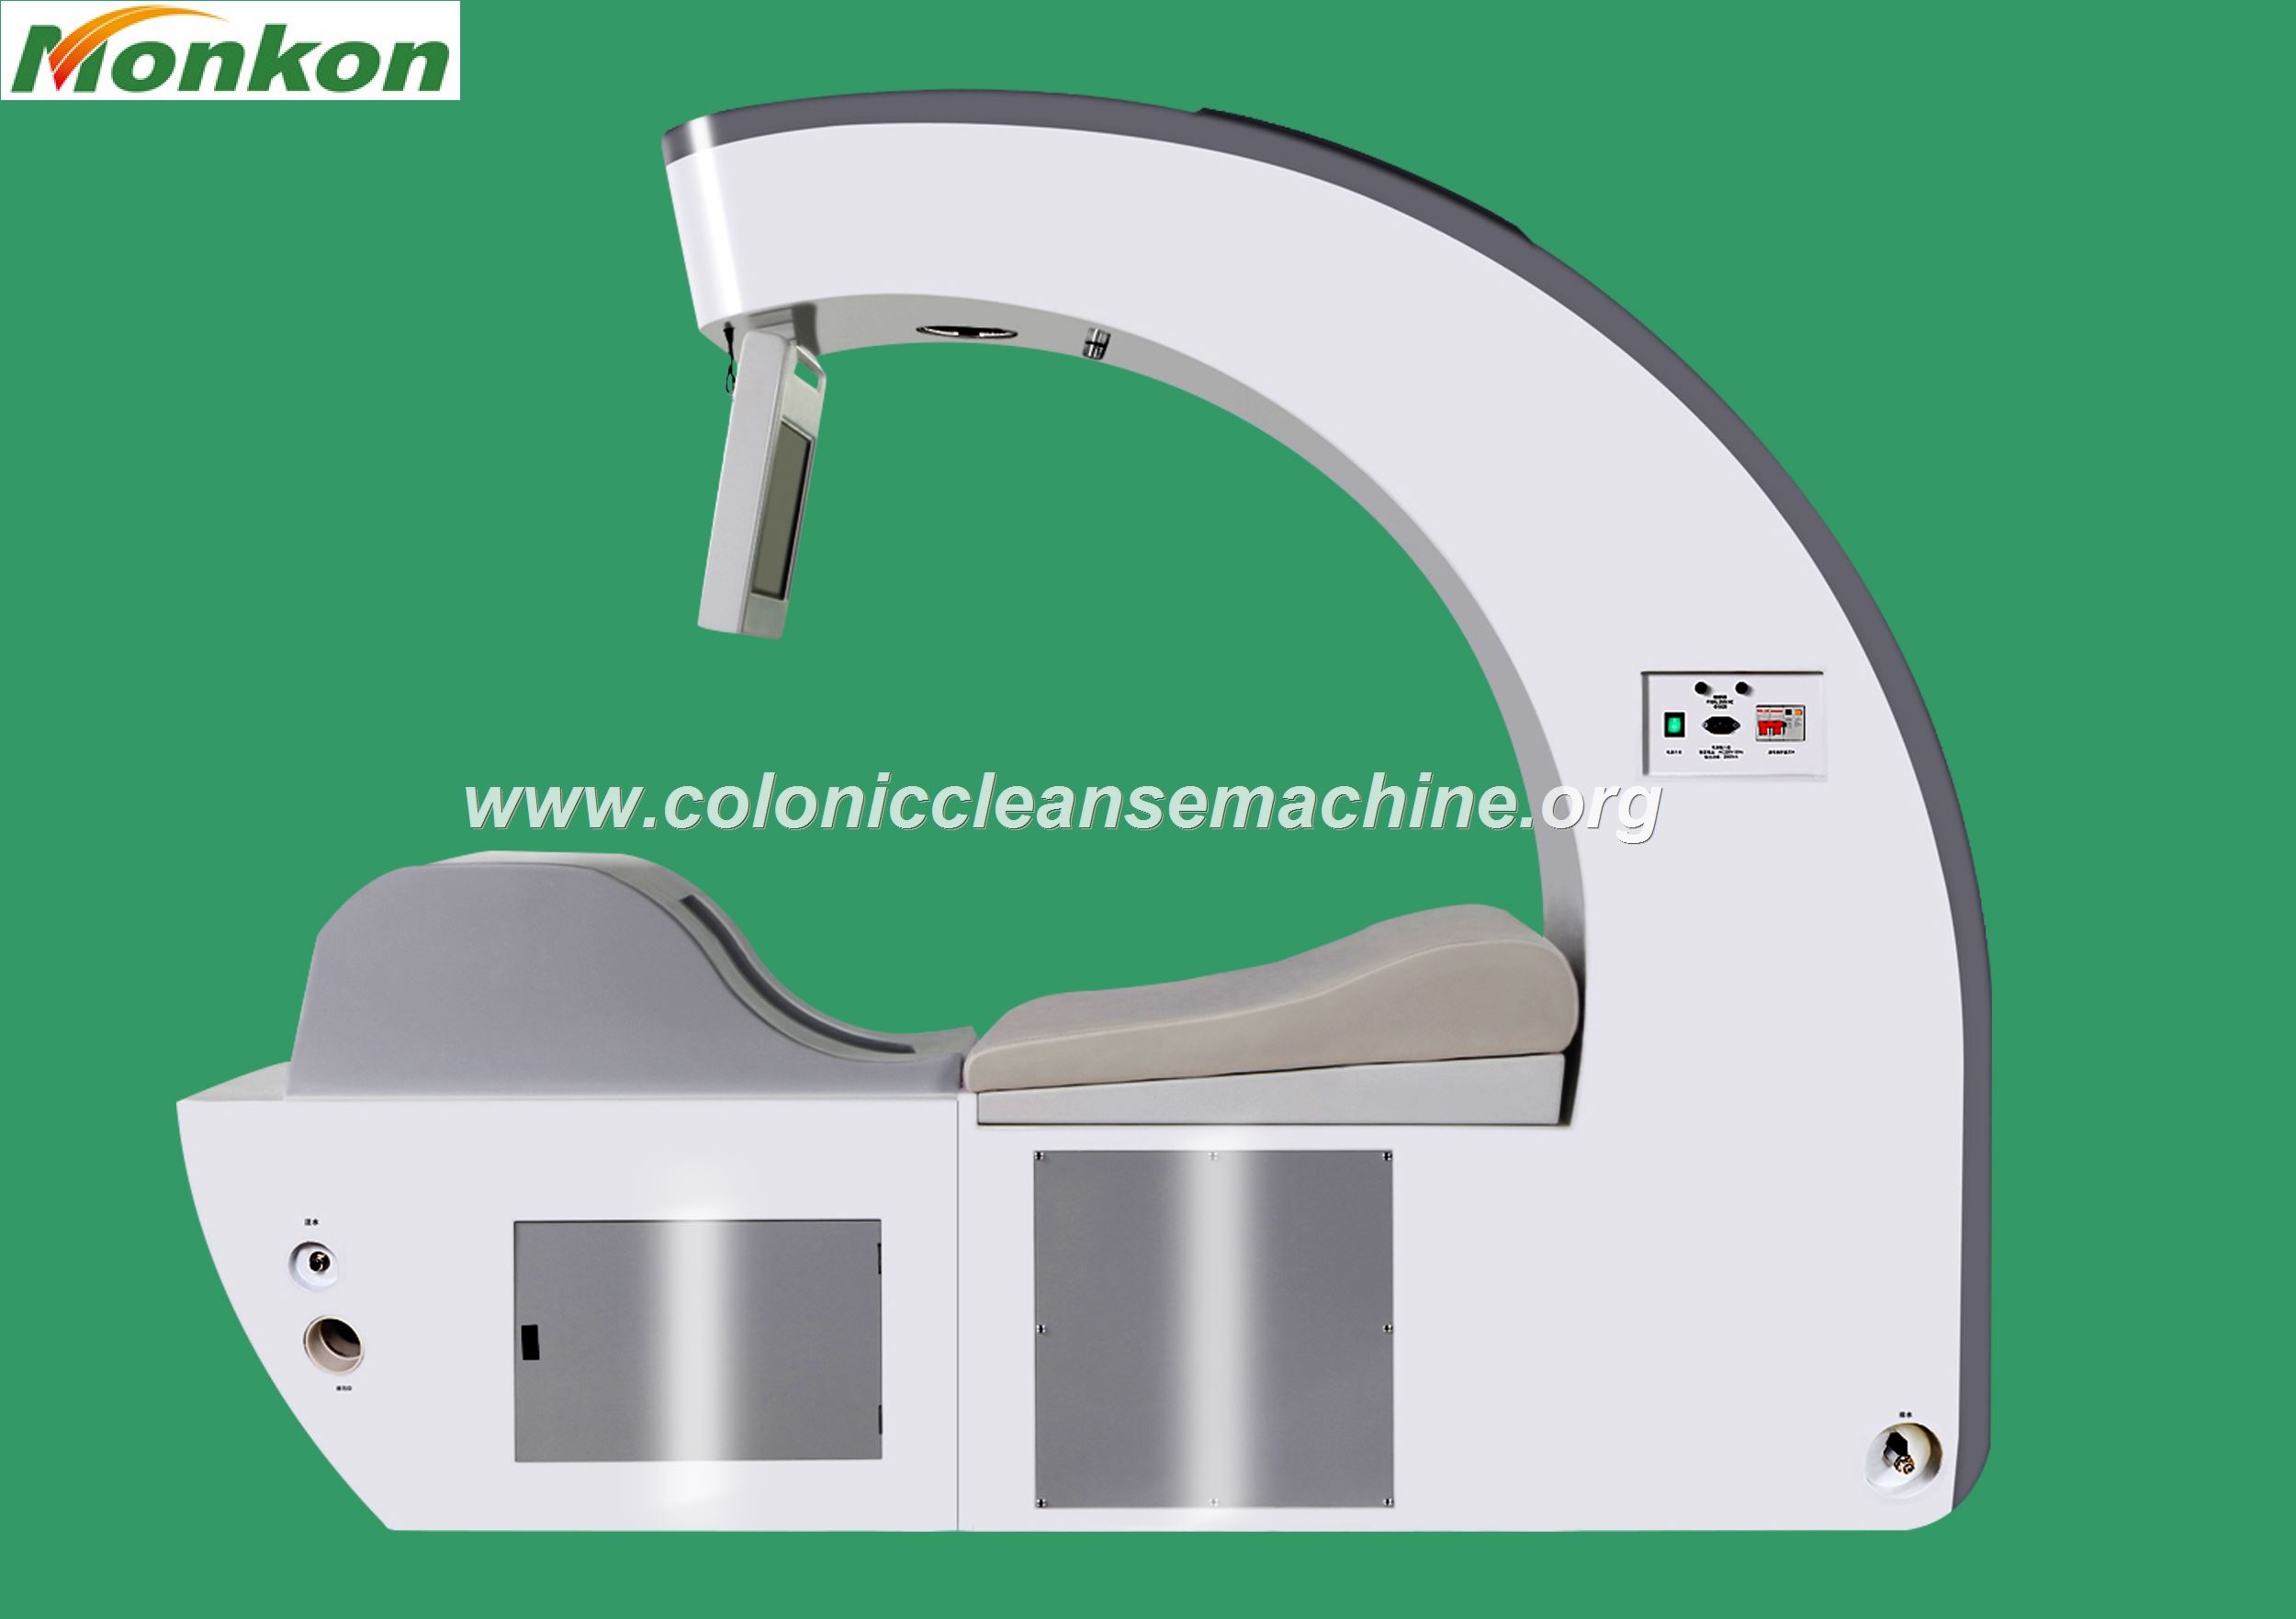 Colonic Cleanse Machine